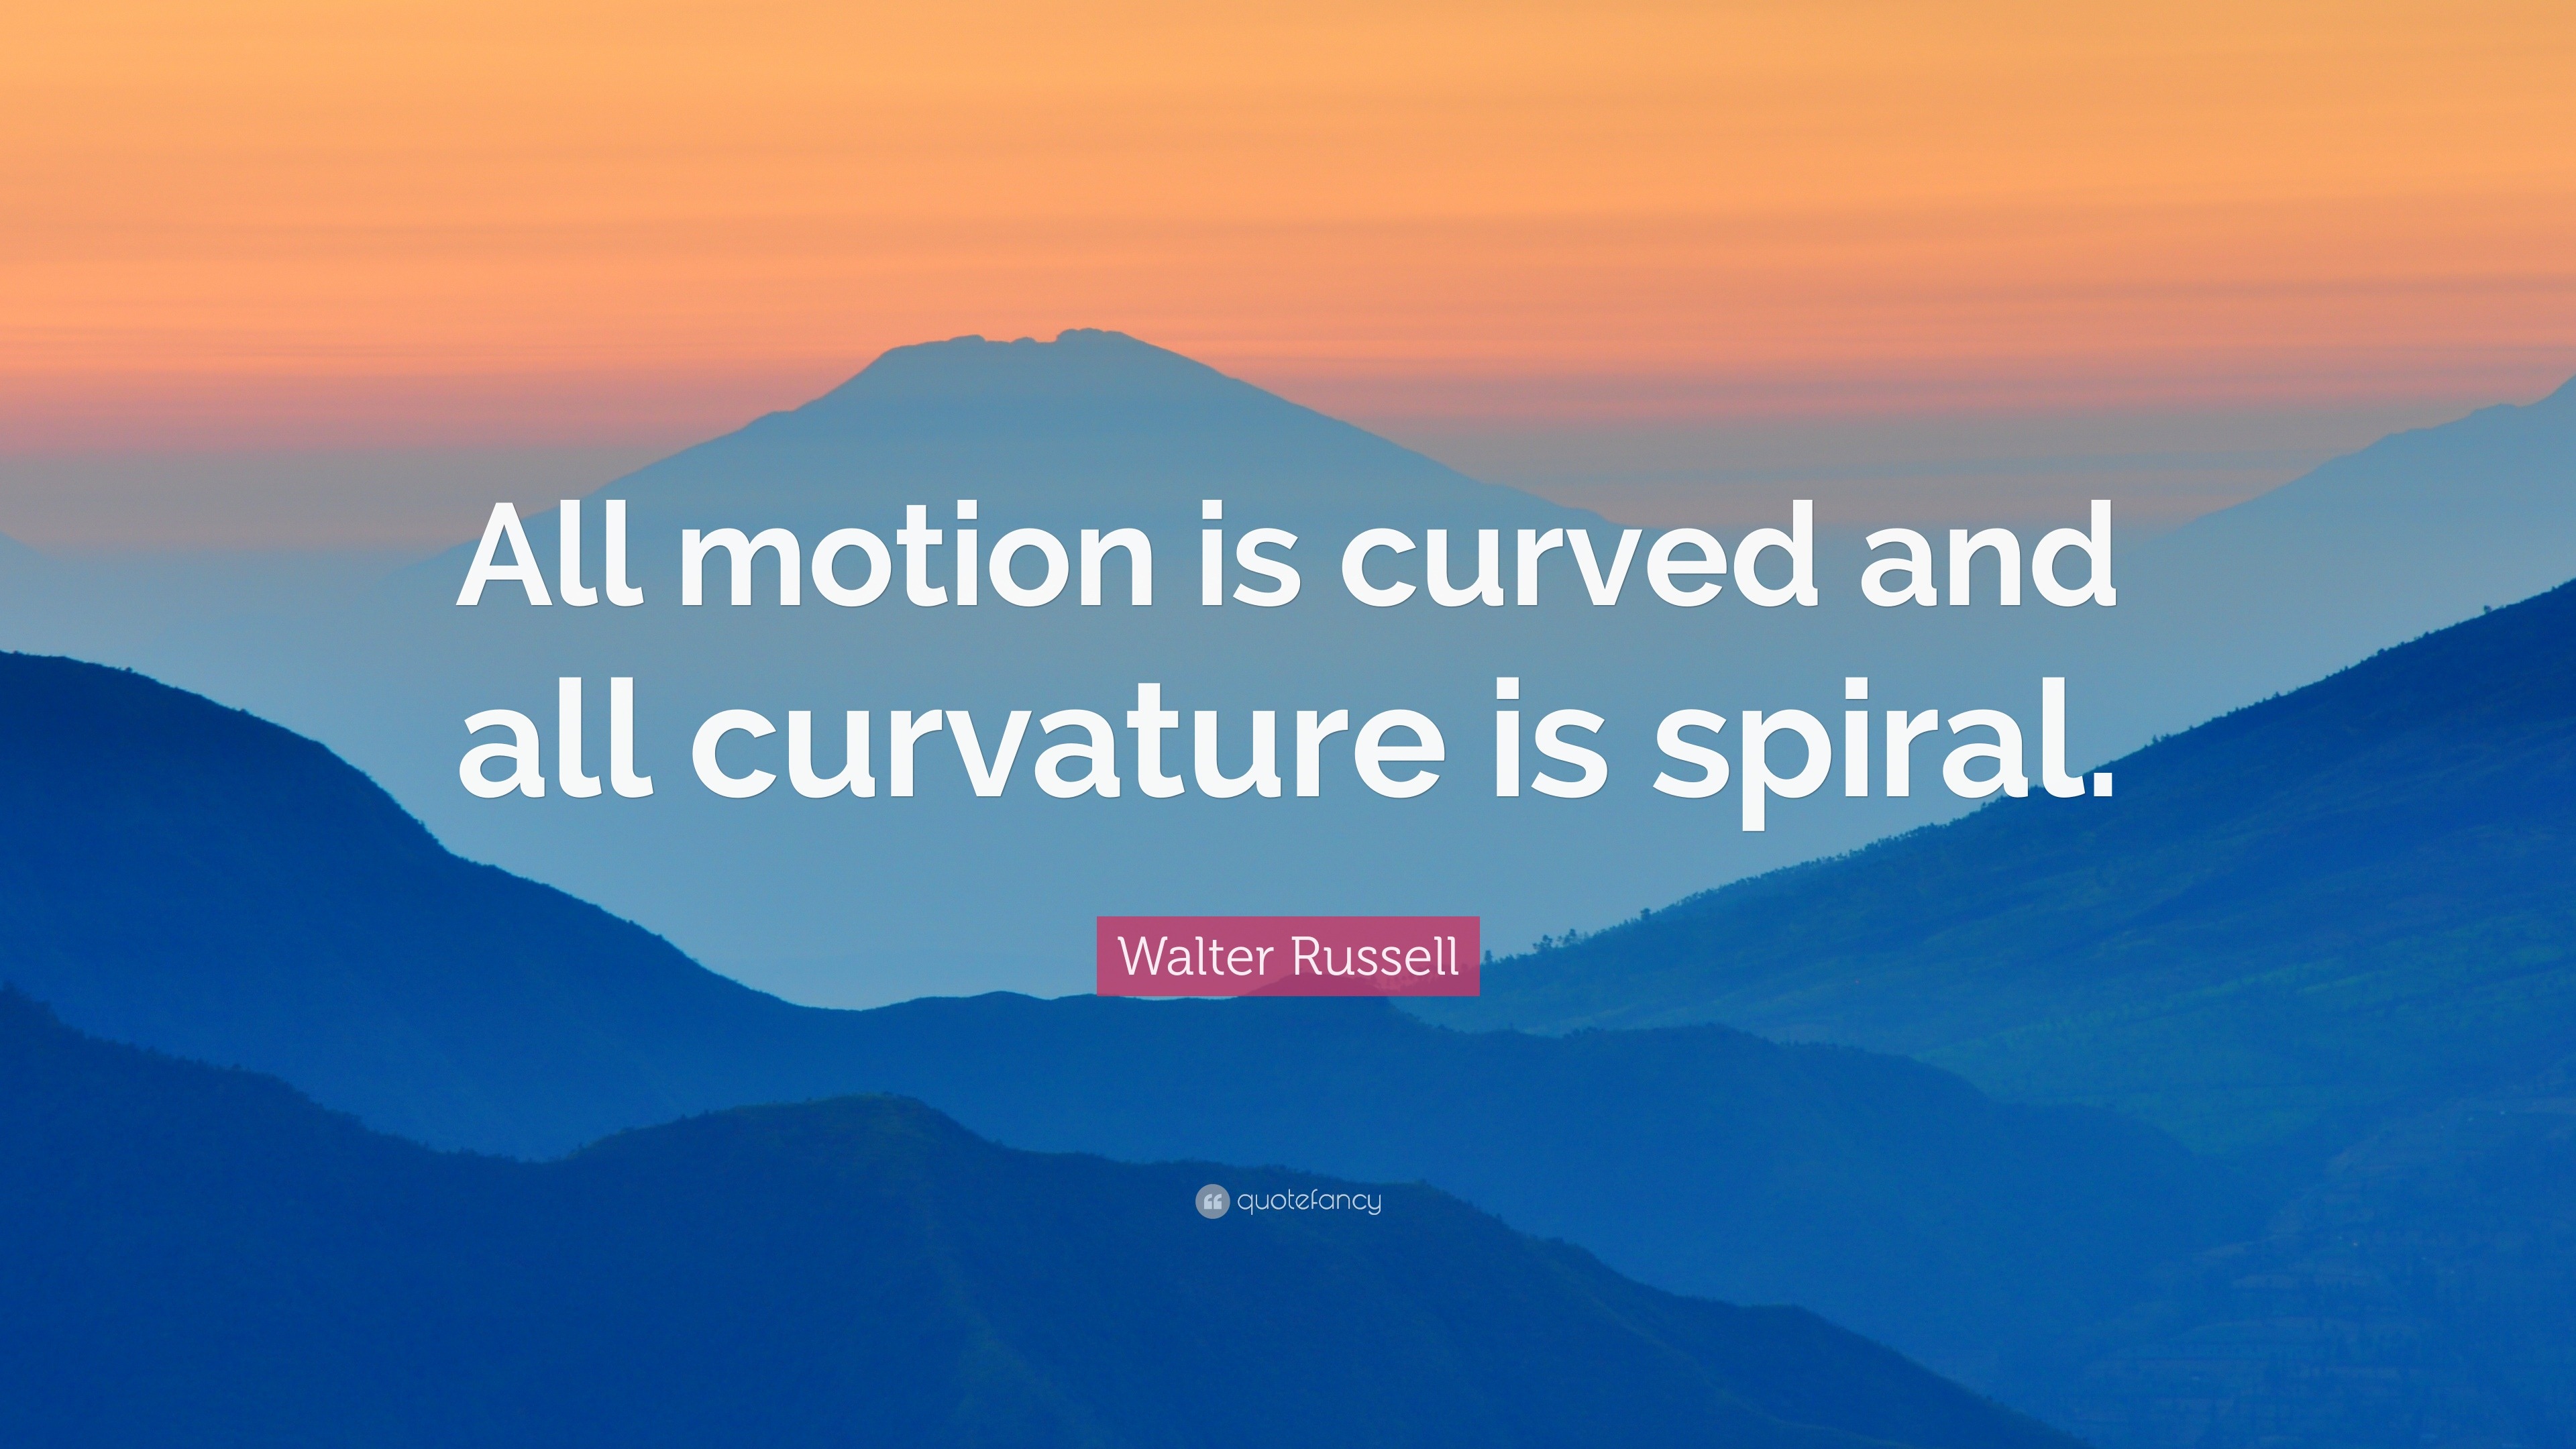 Walter Russell Quote: “All motion is curved and all curvature is spiral.”